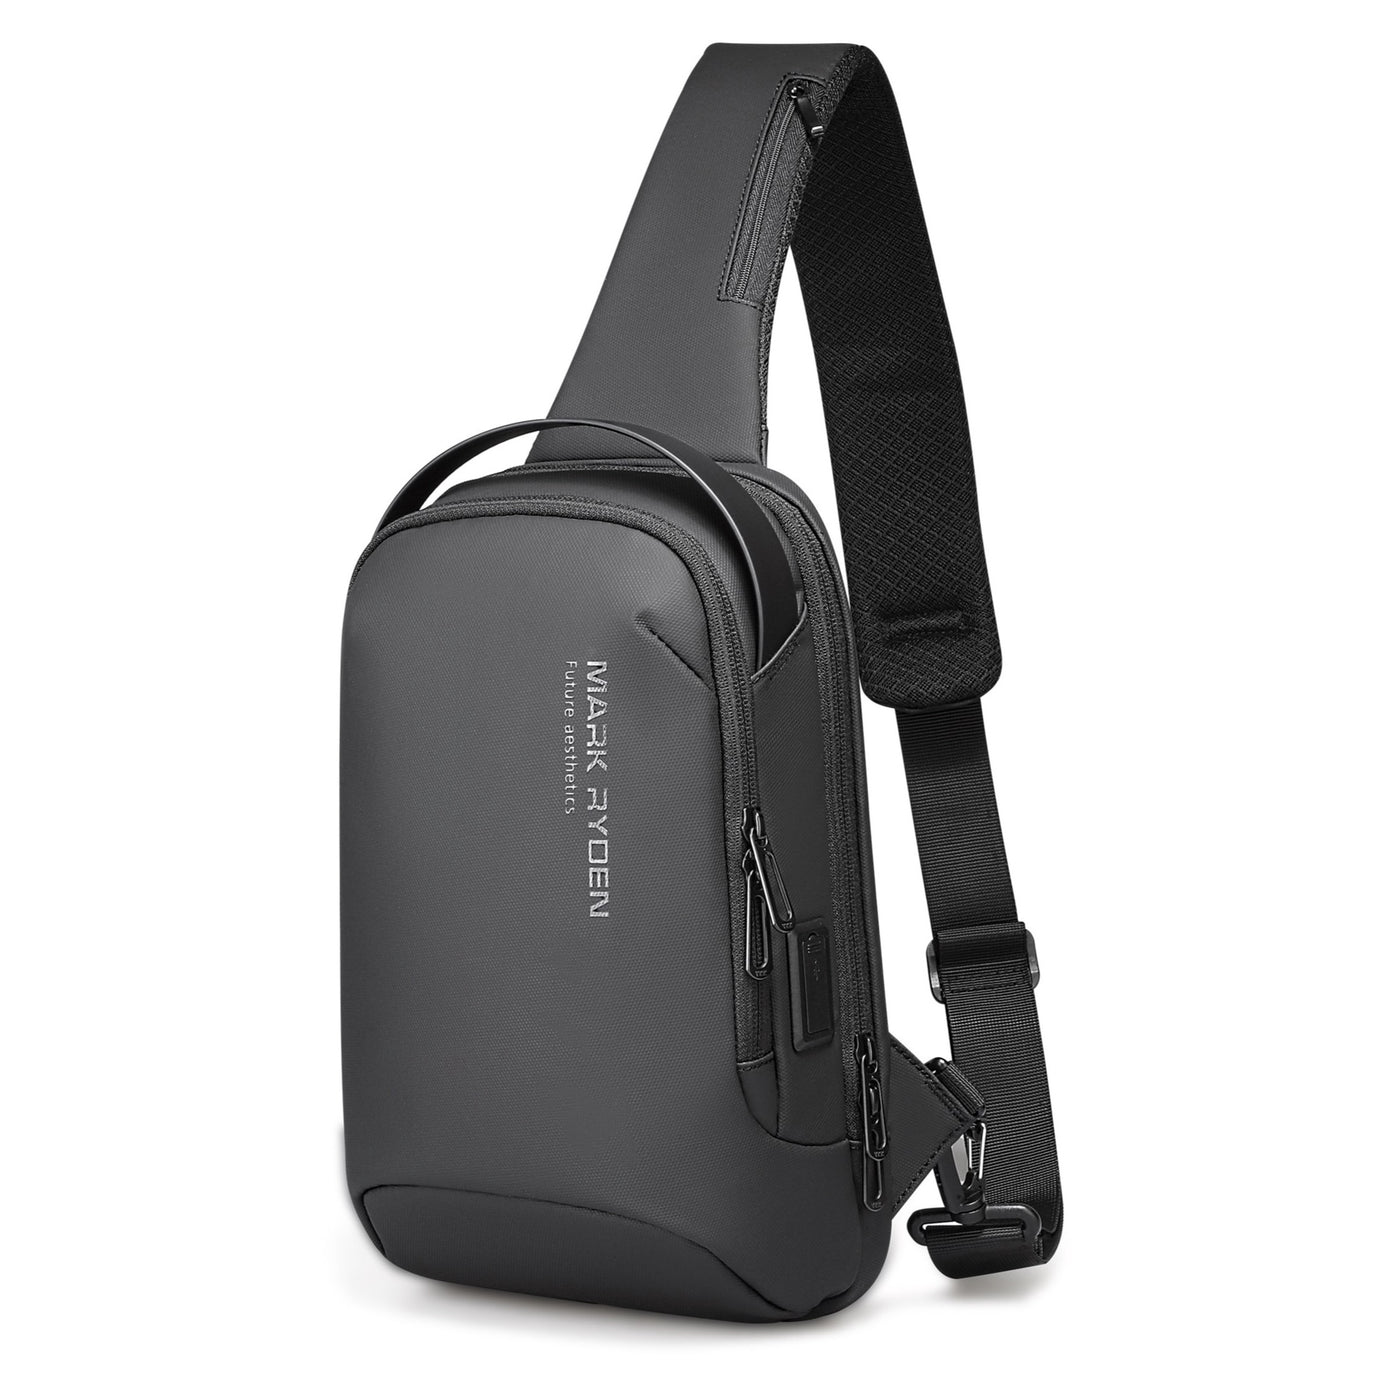 Mark ryden Mode Black crossbody style sling bag with micro and usb charging